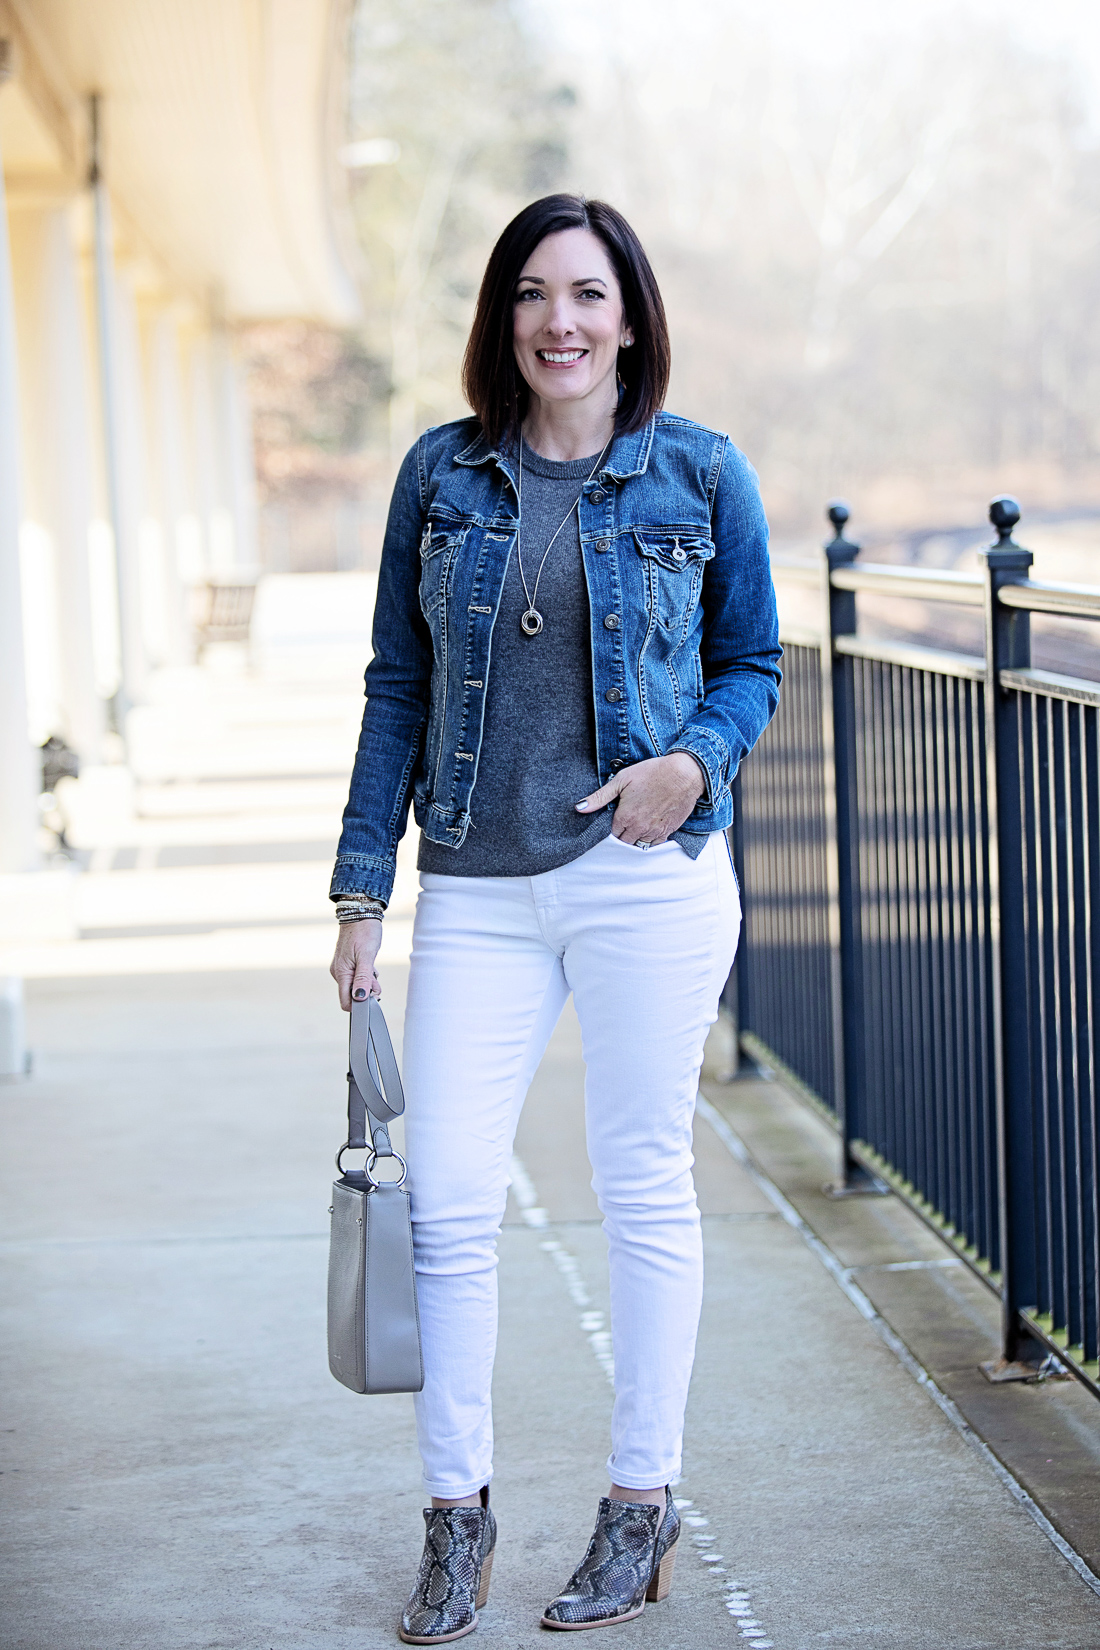 How to Style a Grey Sweater with White Jeans Outfit for Winter